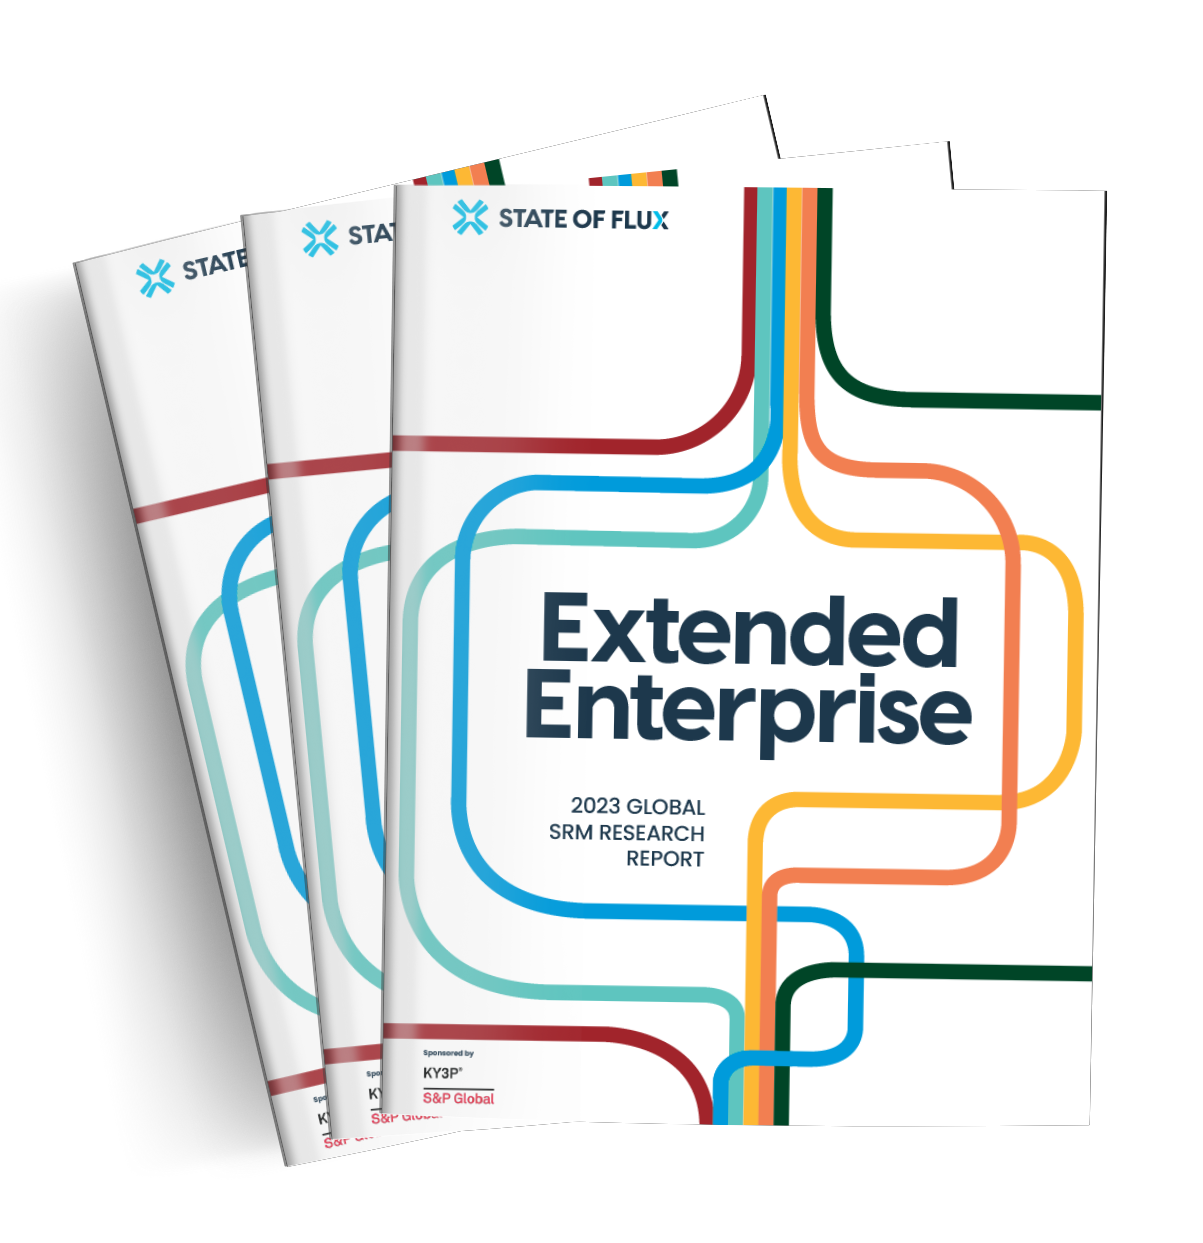 2023 Global SRM Research Report - Extended Enterprise